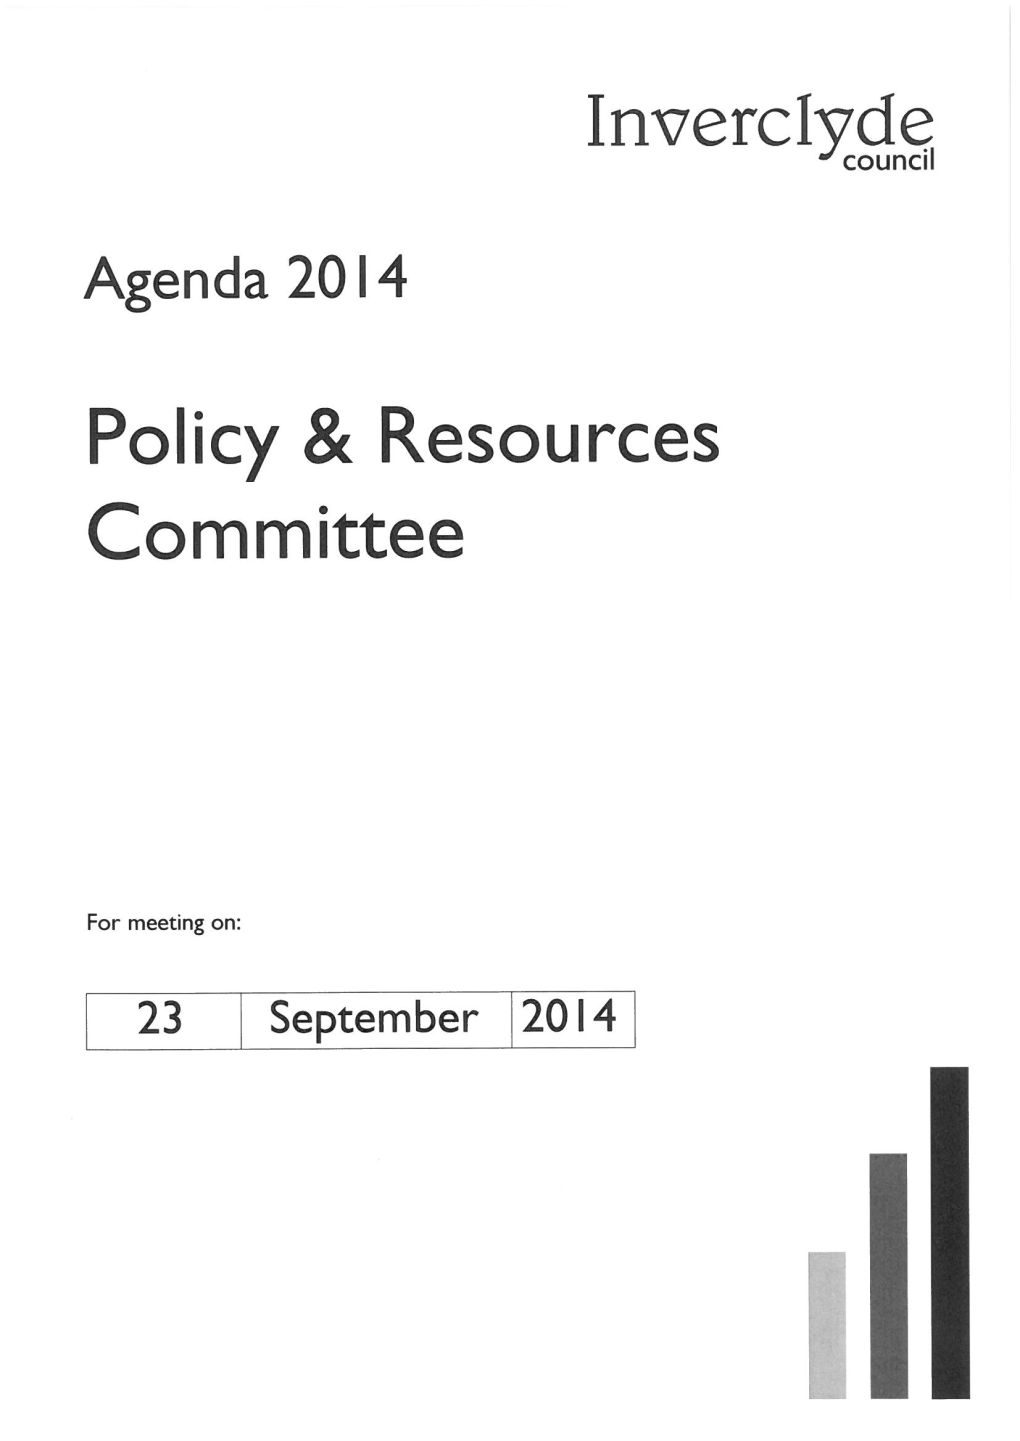 Full Policy & Resources Agenda (LARGE